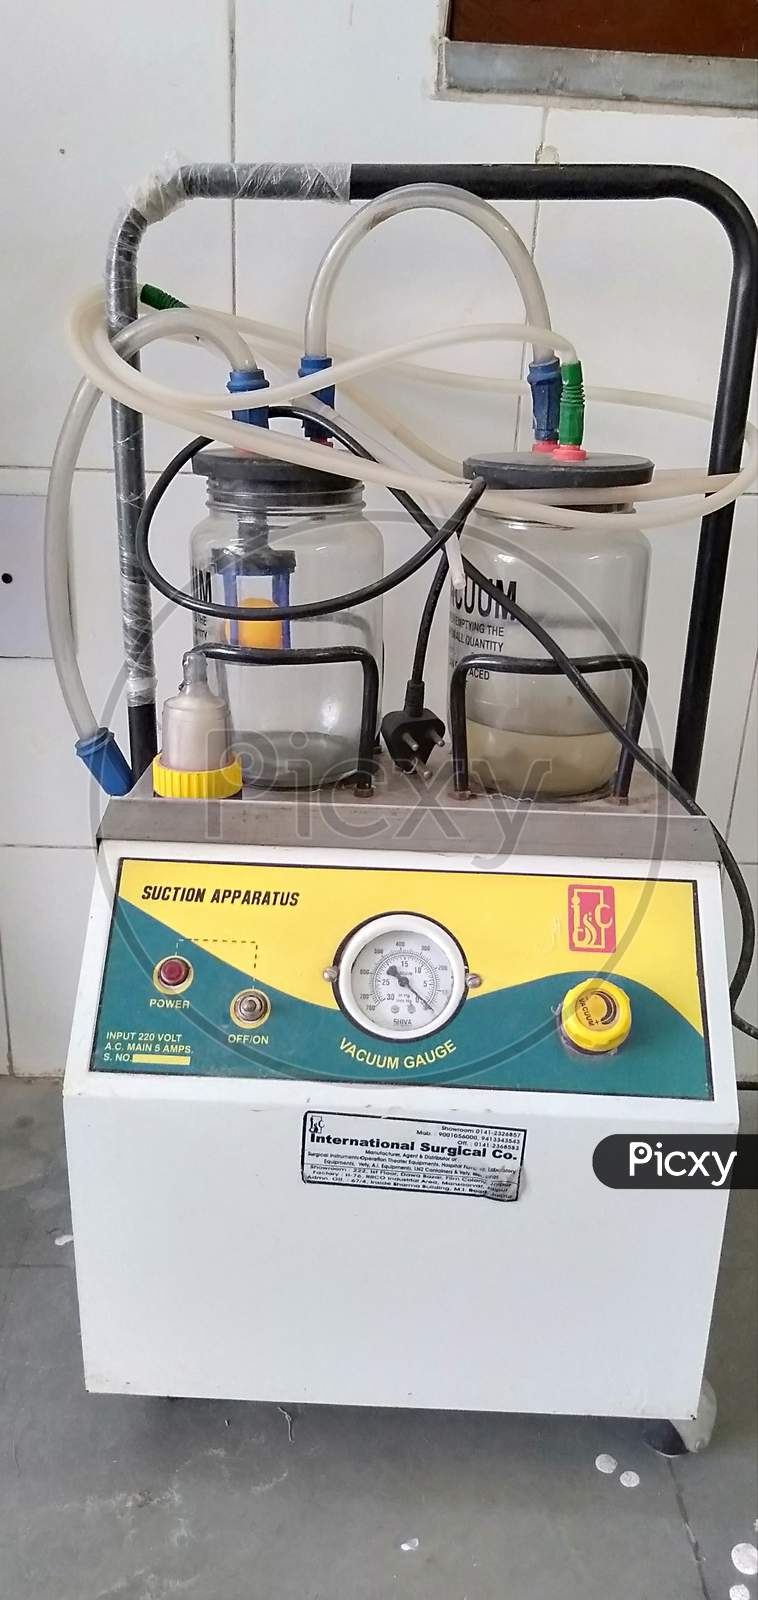 Suction machine for medical hospital